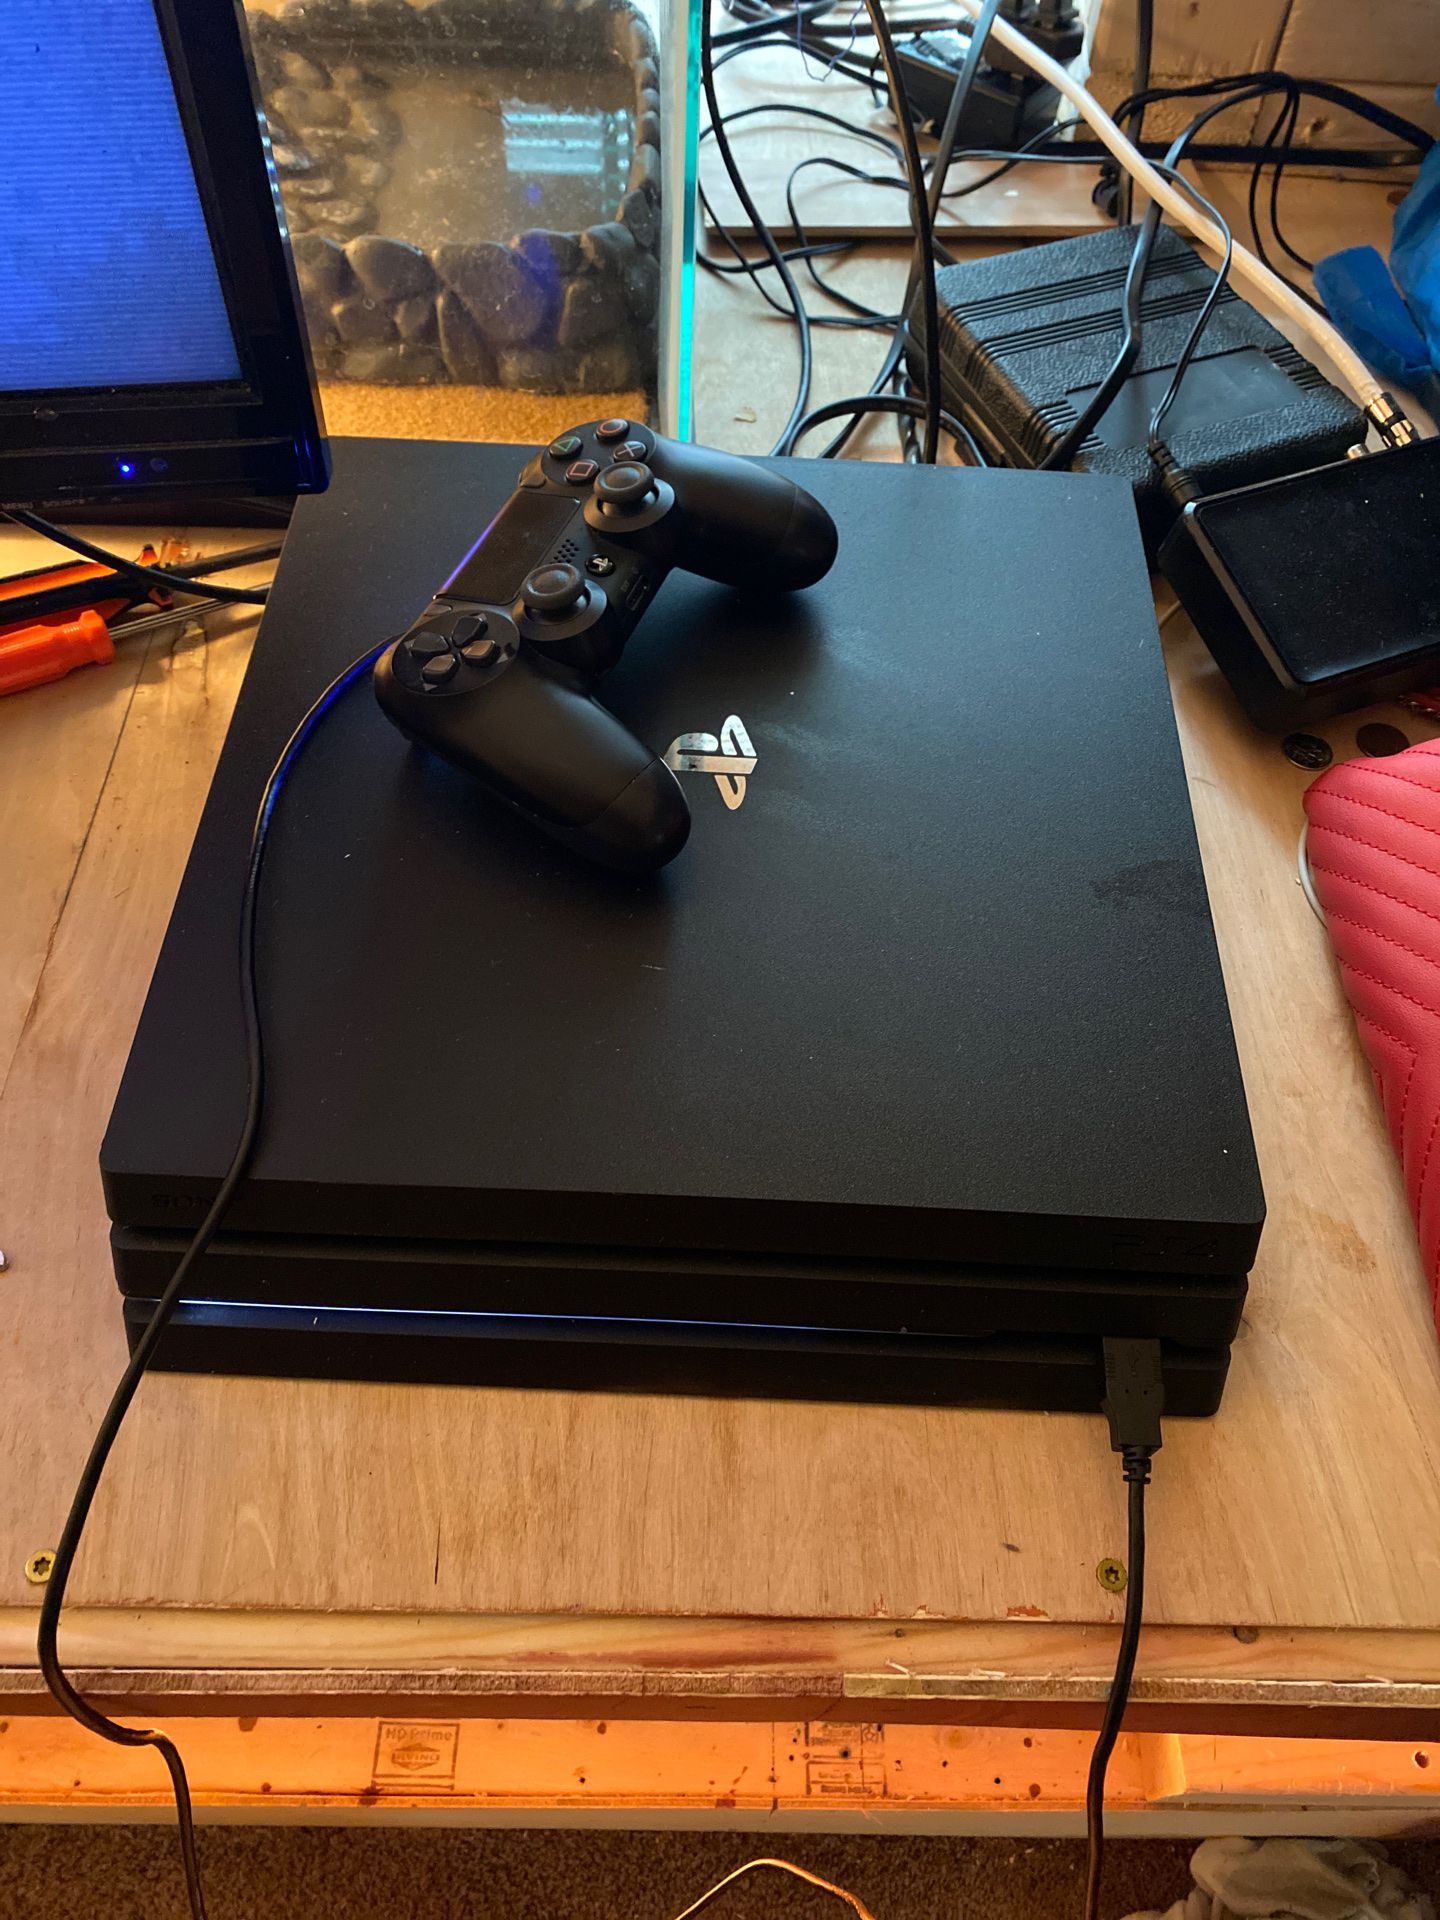 PlayStation 4 ps4 1TB with one controller and one game call of duty black ops 3